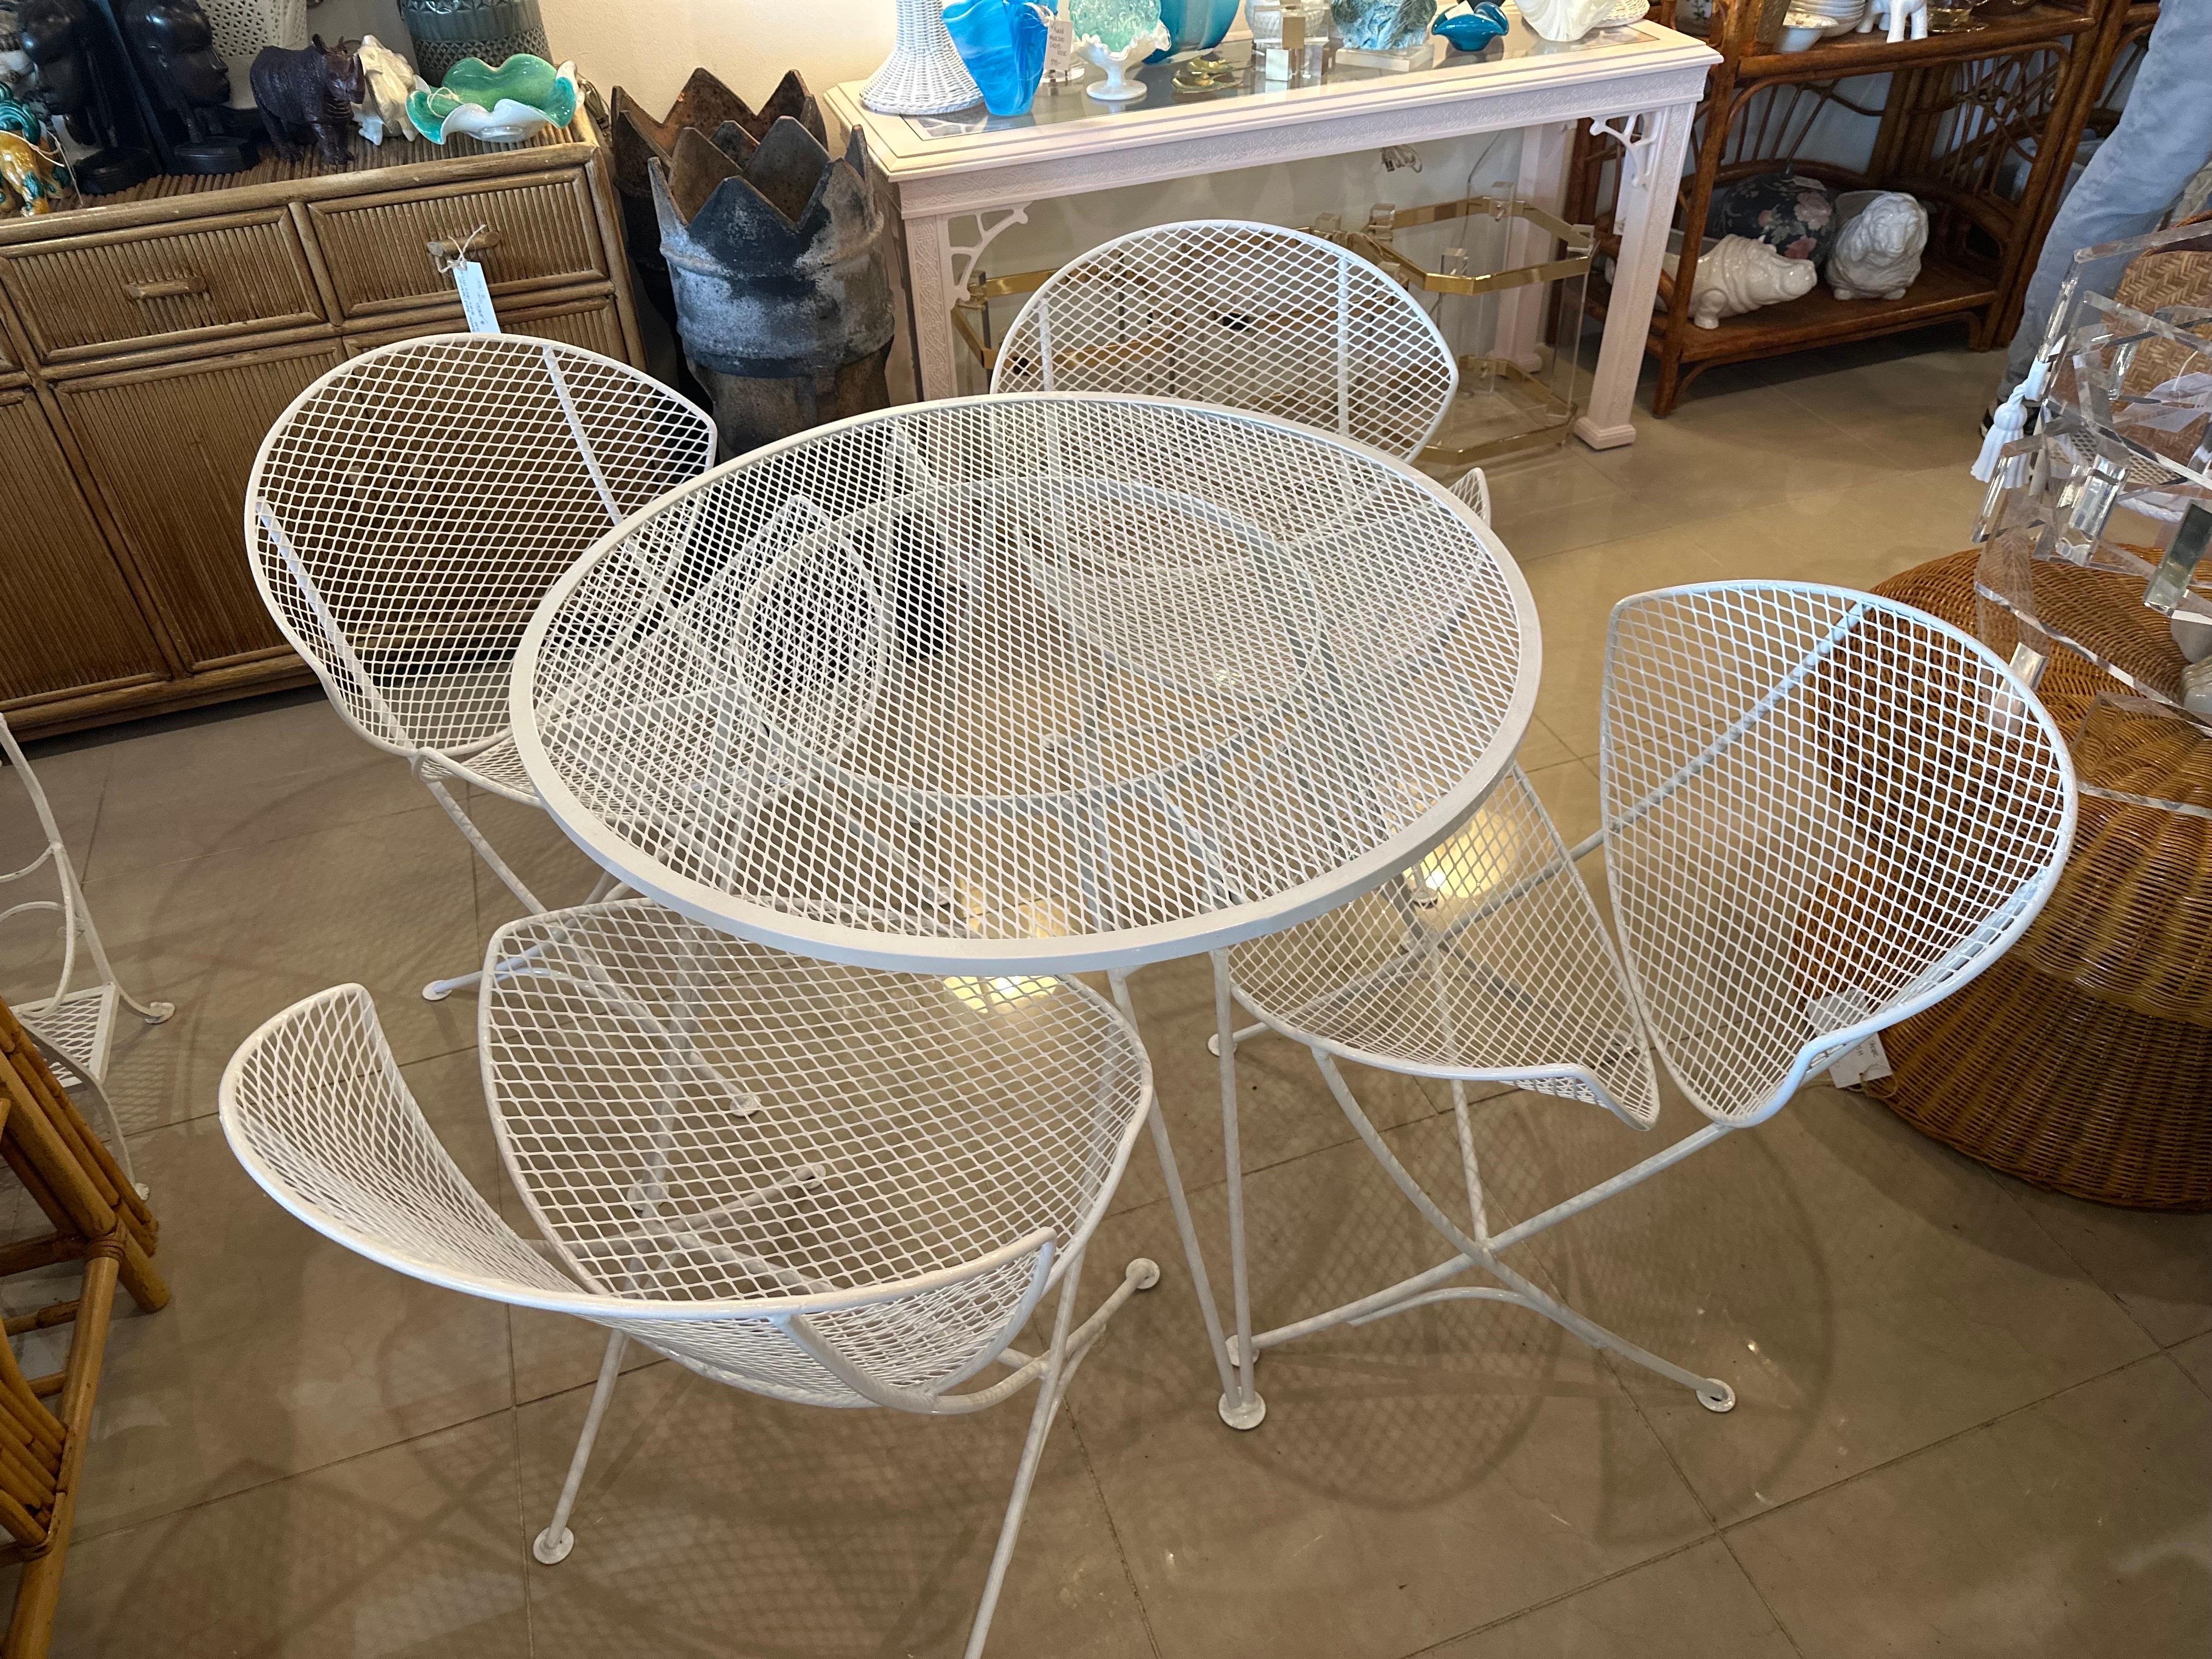 5 Pc Salterini Orange Slice Clam Shell Patio Dining Table & Chairs Powder-Coated In Good Condition For Sale In West Palm Beach, FL